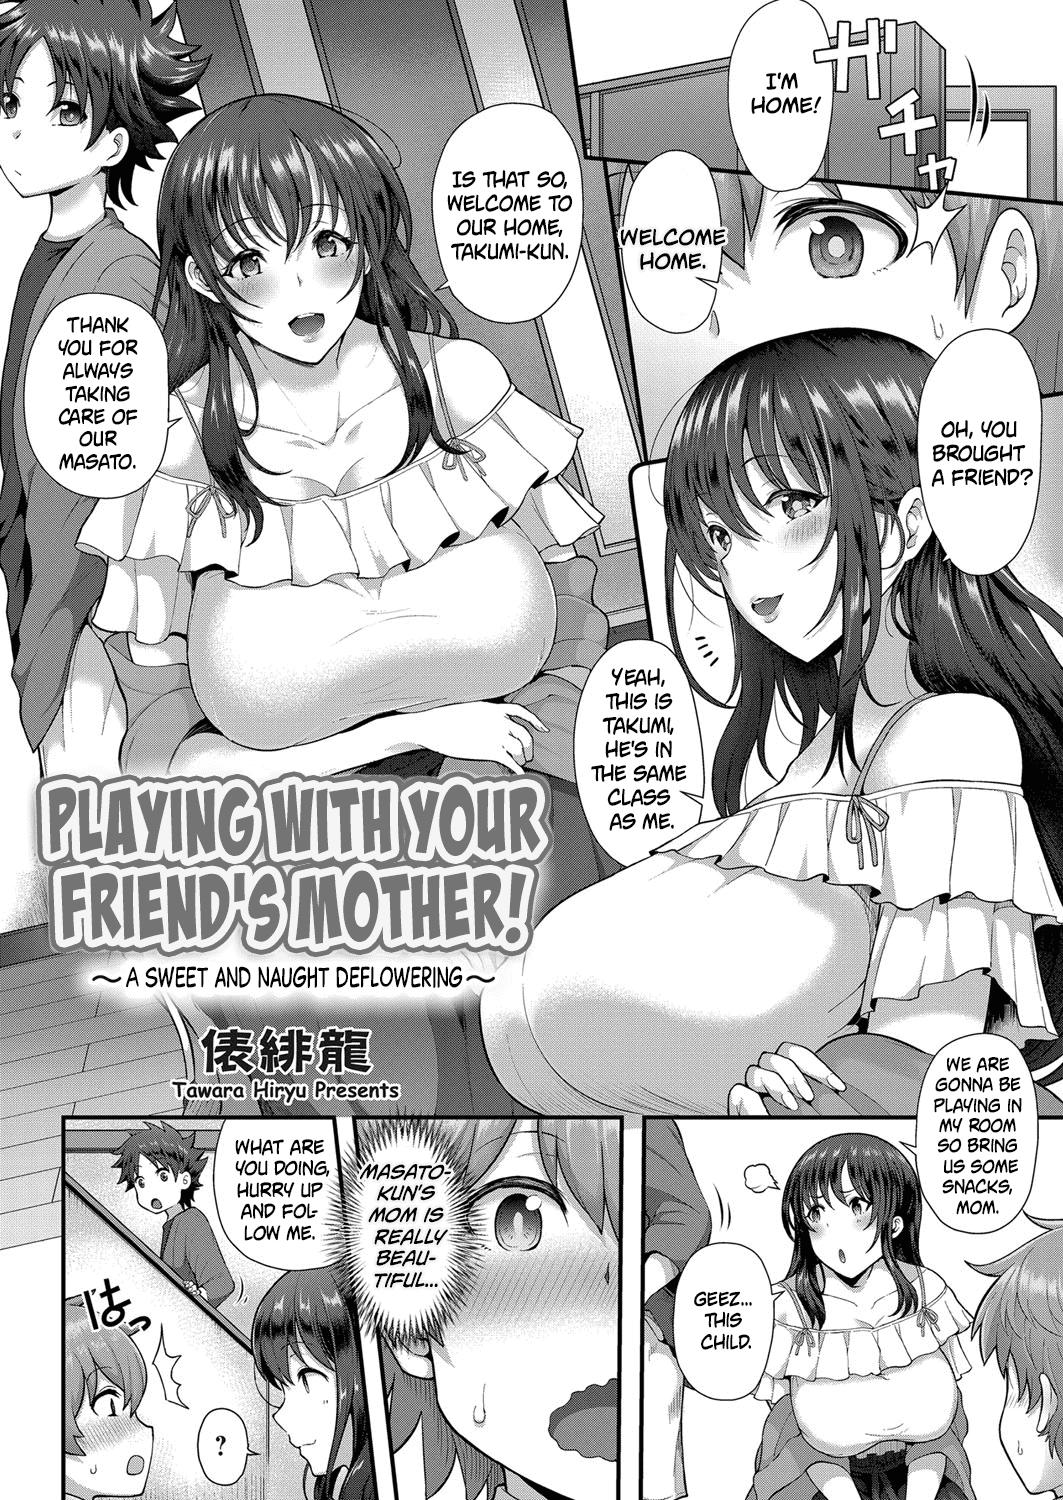 Spying [Tawara Hiryuu] Tomo Haha to Asobo! ~Amakute Ecchi na Fudeoroshi~ | Playing With Your Friend's Mother! ~A Sweet and Naught Deflowering~ (COMIC Grape Vol. 68) [English] [At4r1] Step Brother - Page 2